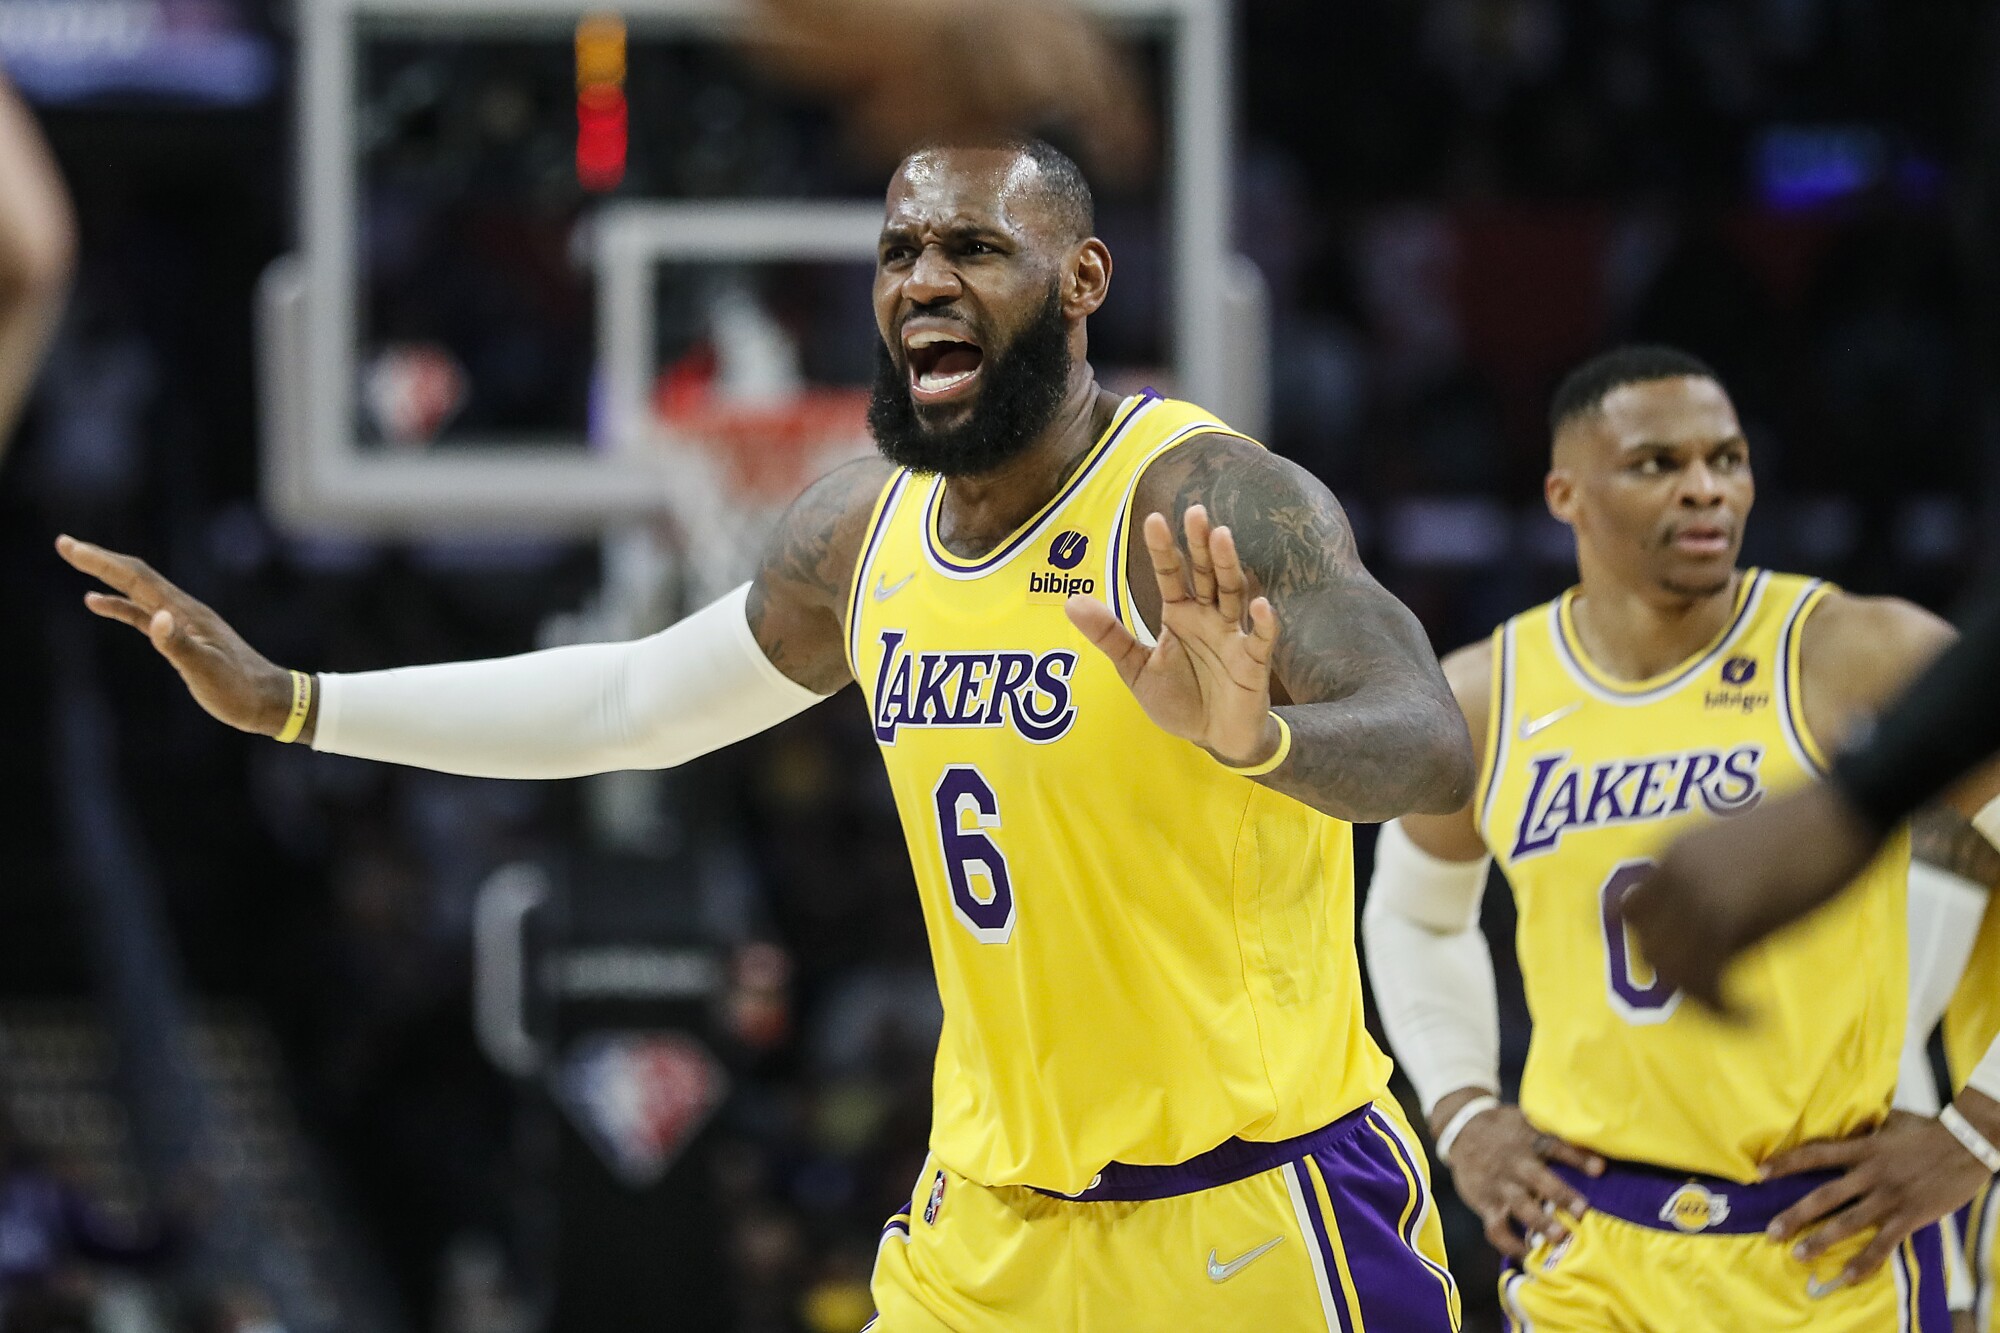 Lakers forward LeBron James opens his mouth and puts his hands out on either side.